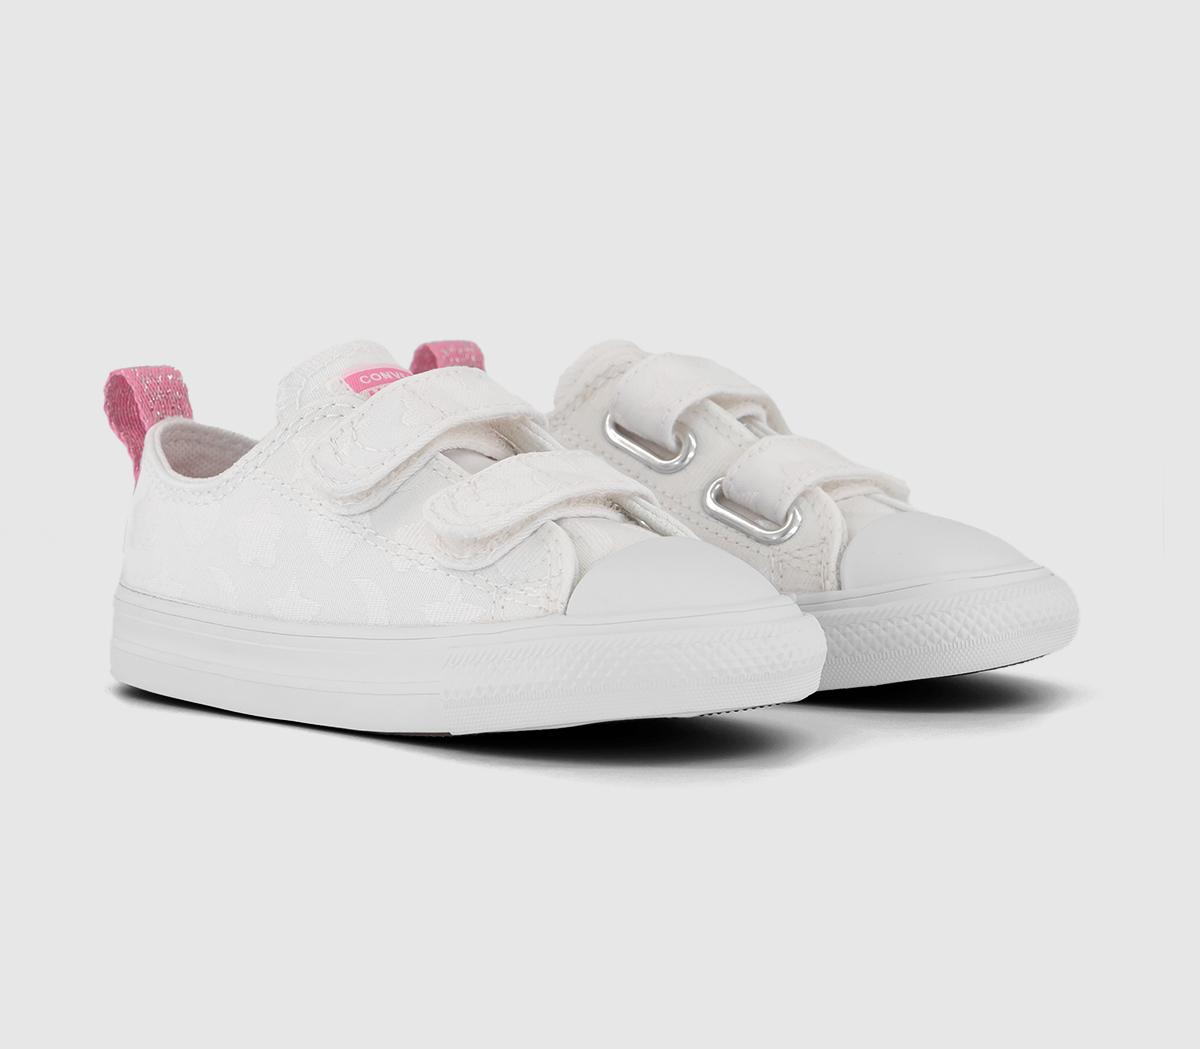 Converse Kids All Star 2vlace Trainers White Oops Pink, 4infant